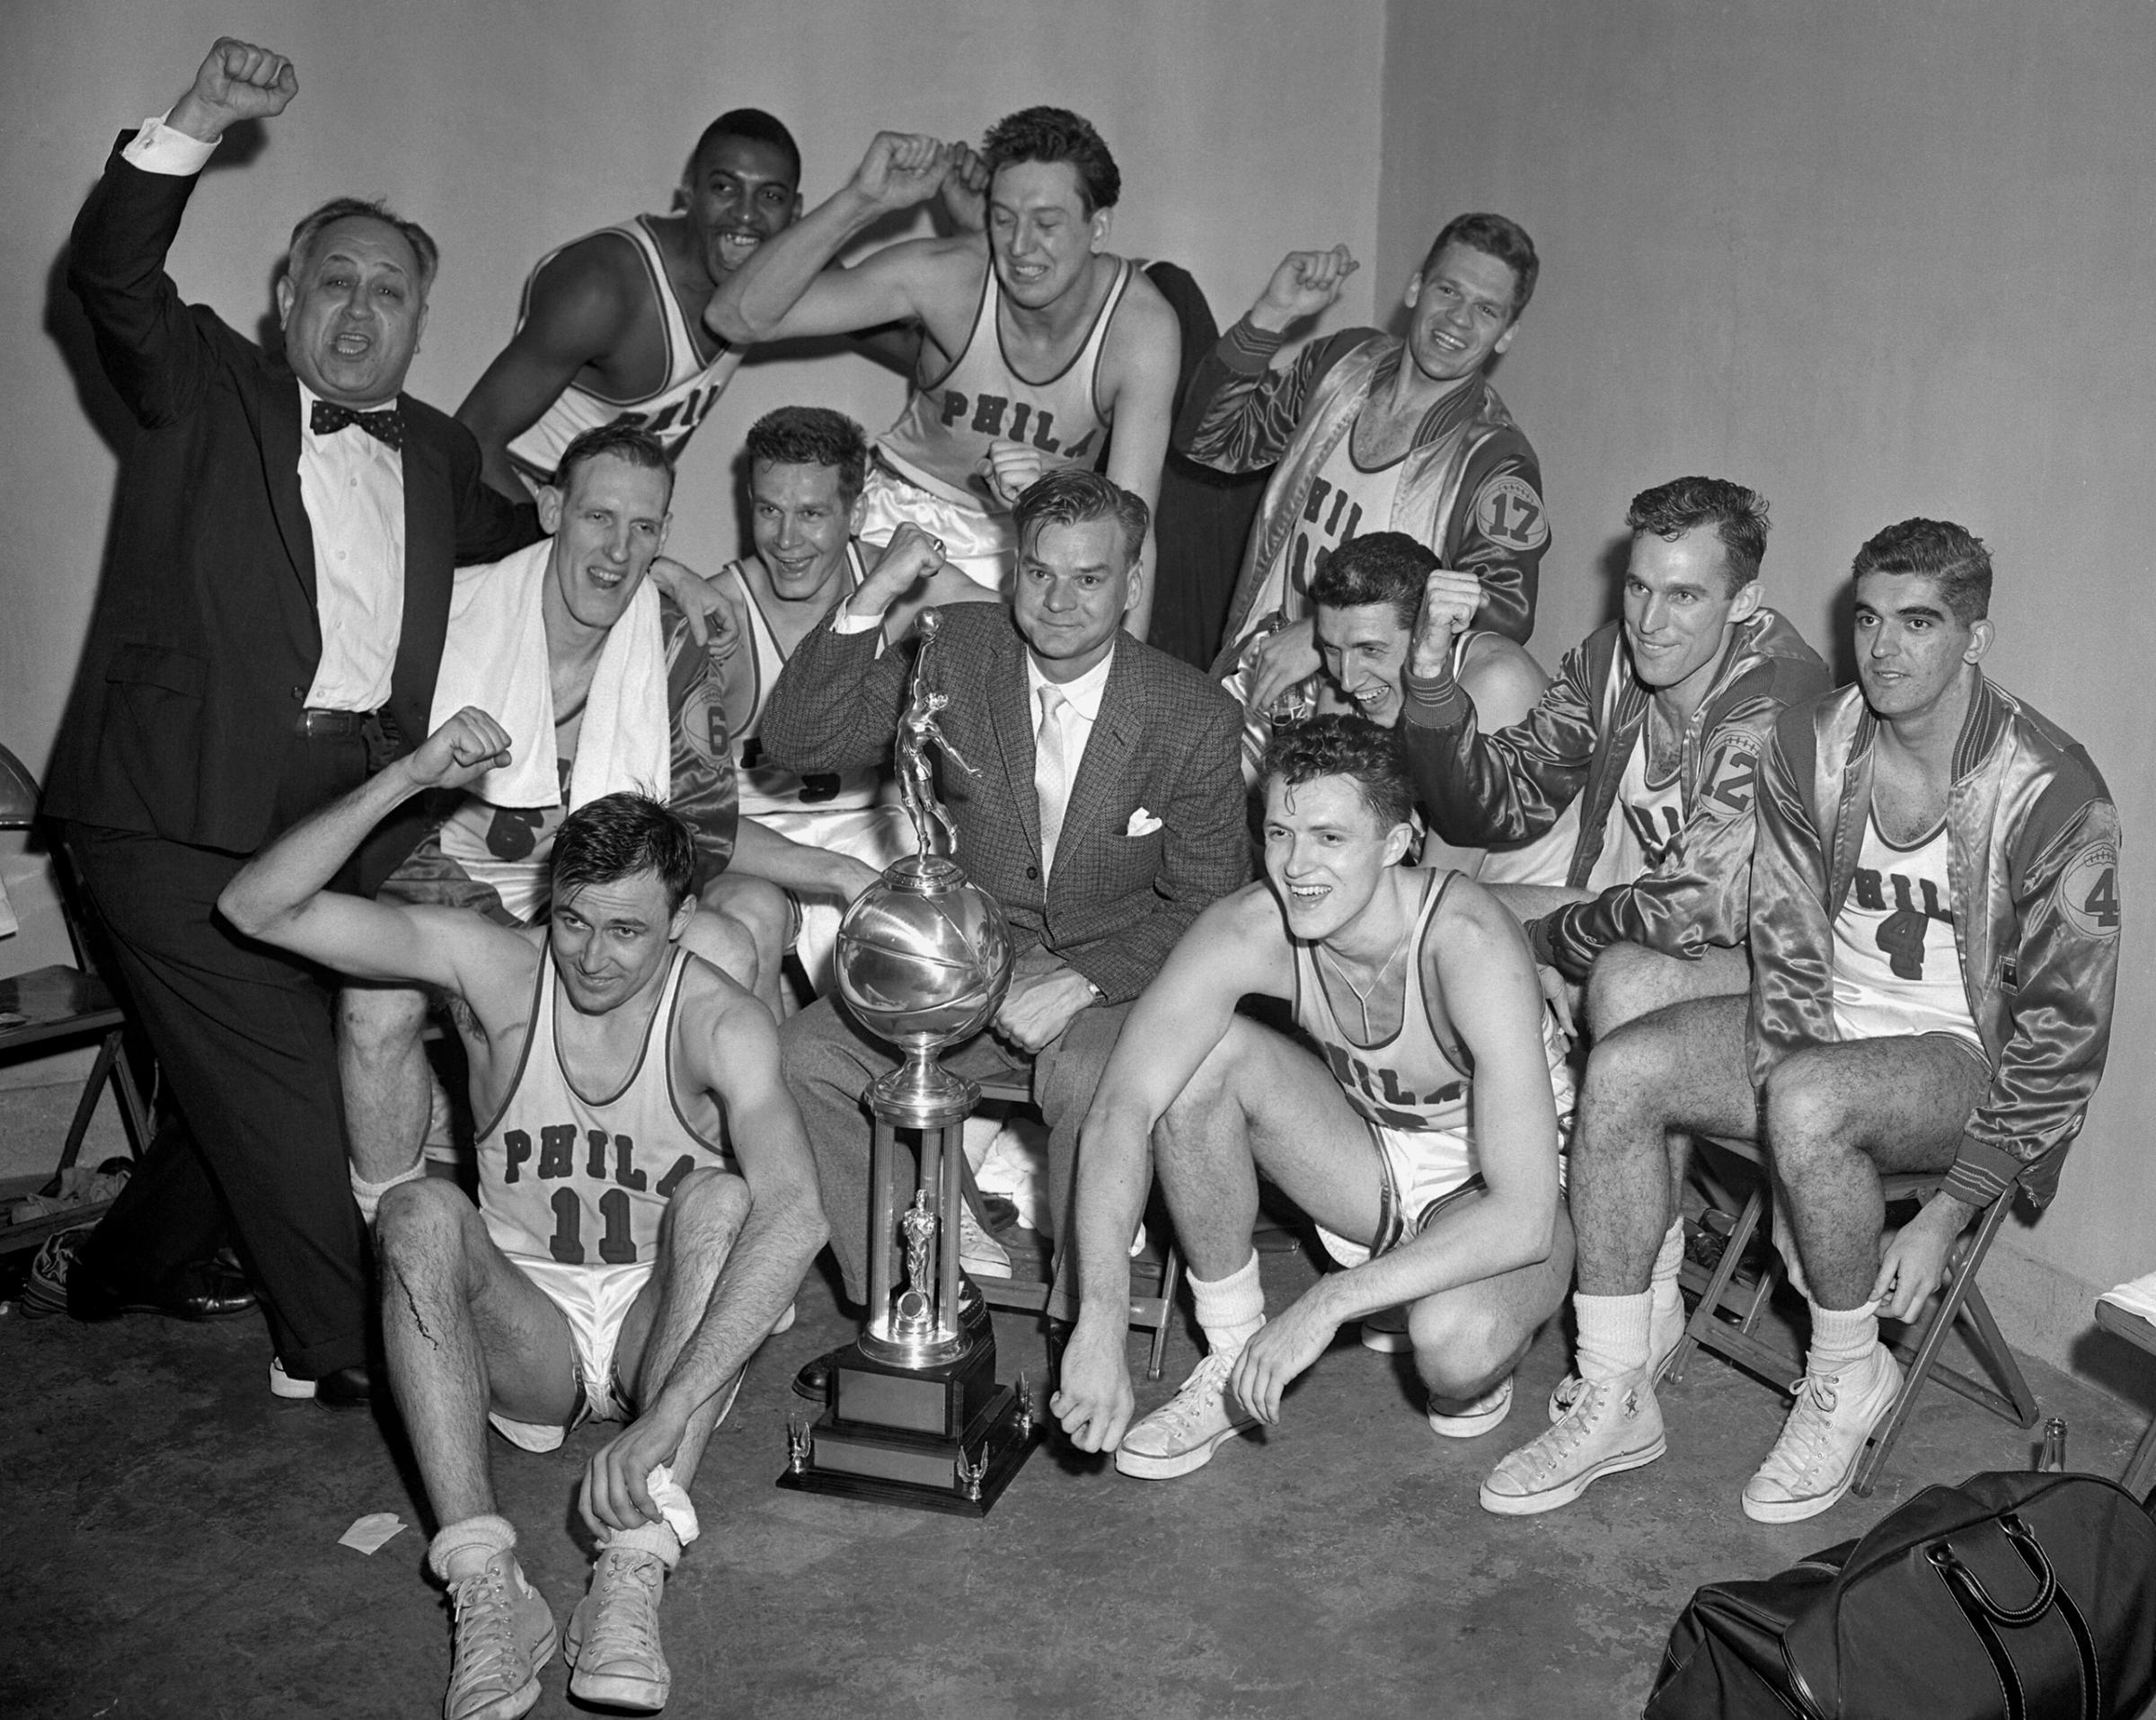 Philadelphia Warriors against the Fort Wayne Pistons during Game Five of the NBA Finals on April 7, 1956 at the Philadelphia Civic Center in Philadelphia, Pennsylvania. The Philadelphia Warriors defeated the Fort Wayne Pistons 99-88 and won the series 4-1.